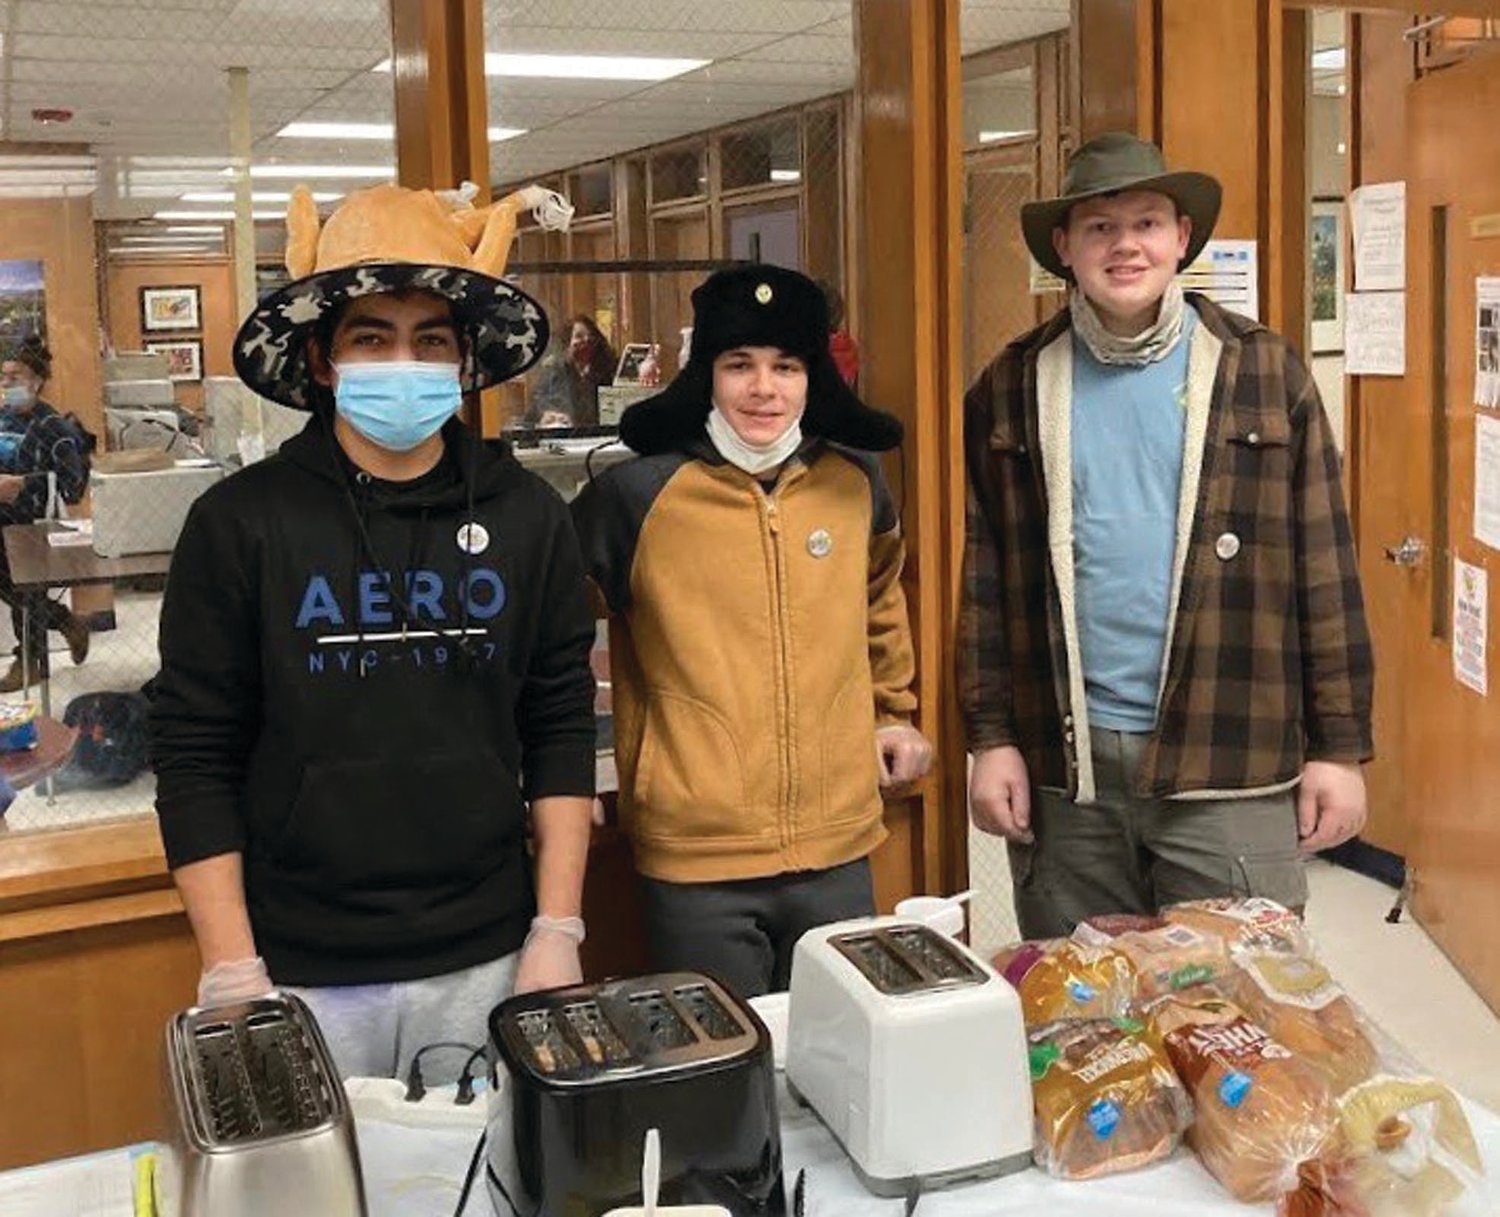 TOASTING TRIO: While swearing their Crazy Hats, JHS Music Students Josh Galeas, Willson El Hage and Domenic Whitten made toast for generous faculty and staff during the unique kick-off of the annual Rachel E. Carson Memorial Scholarship Fund.